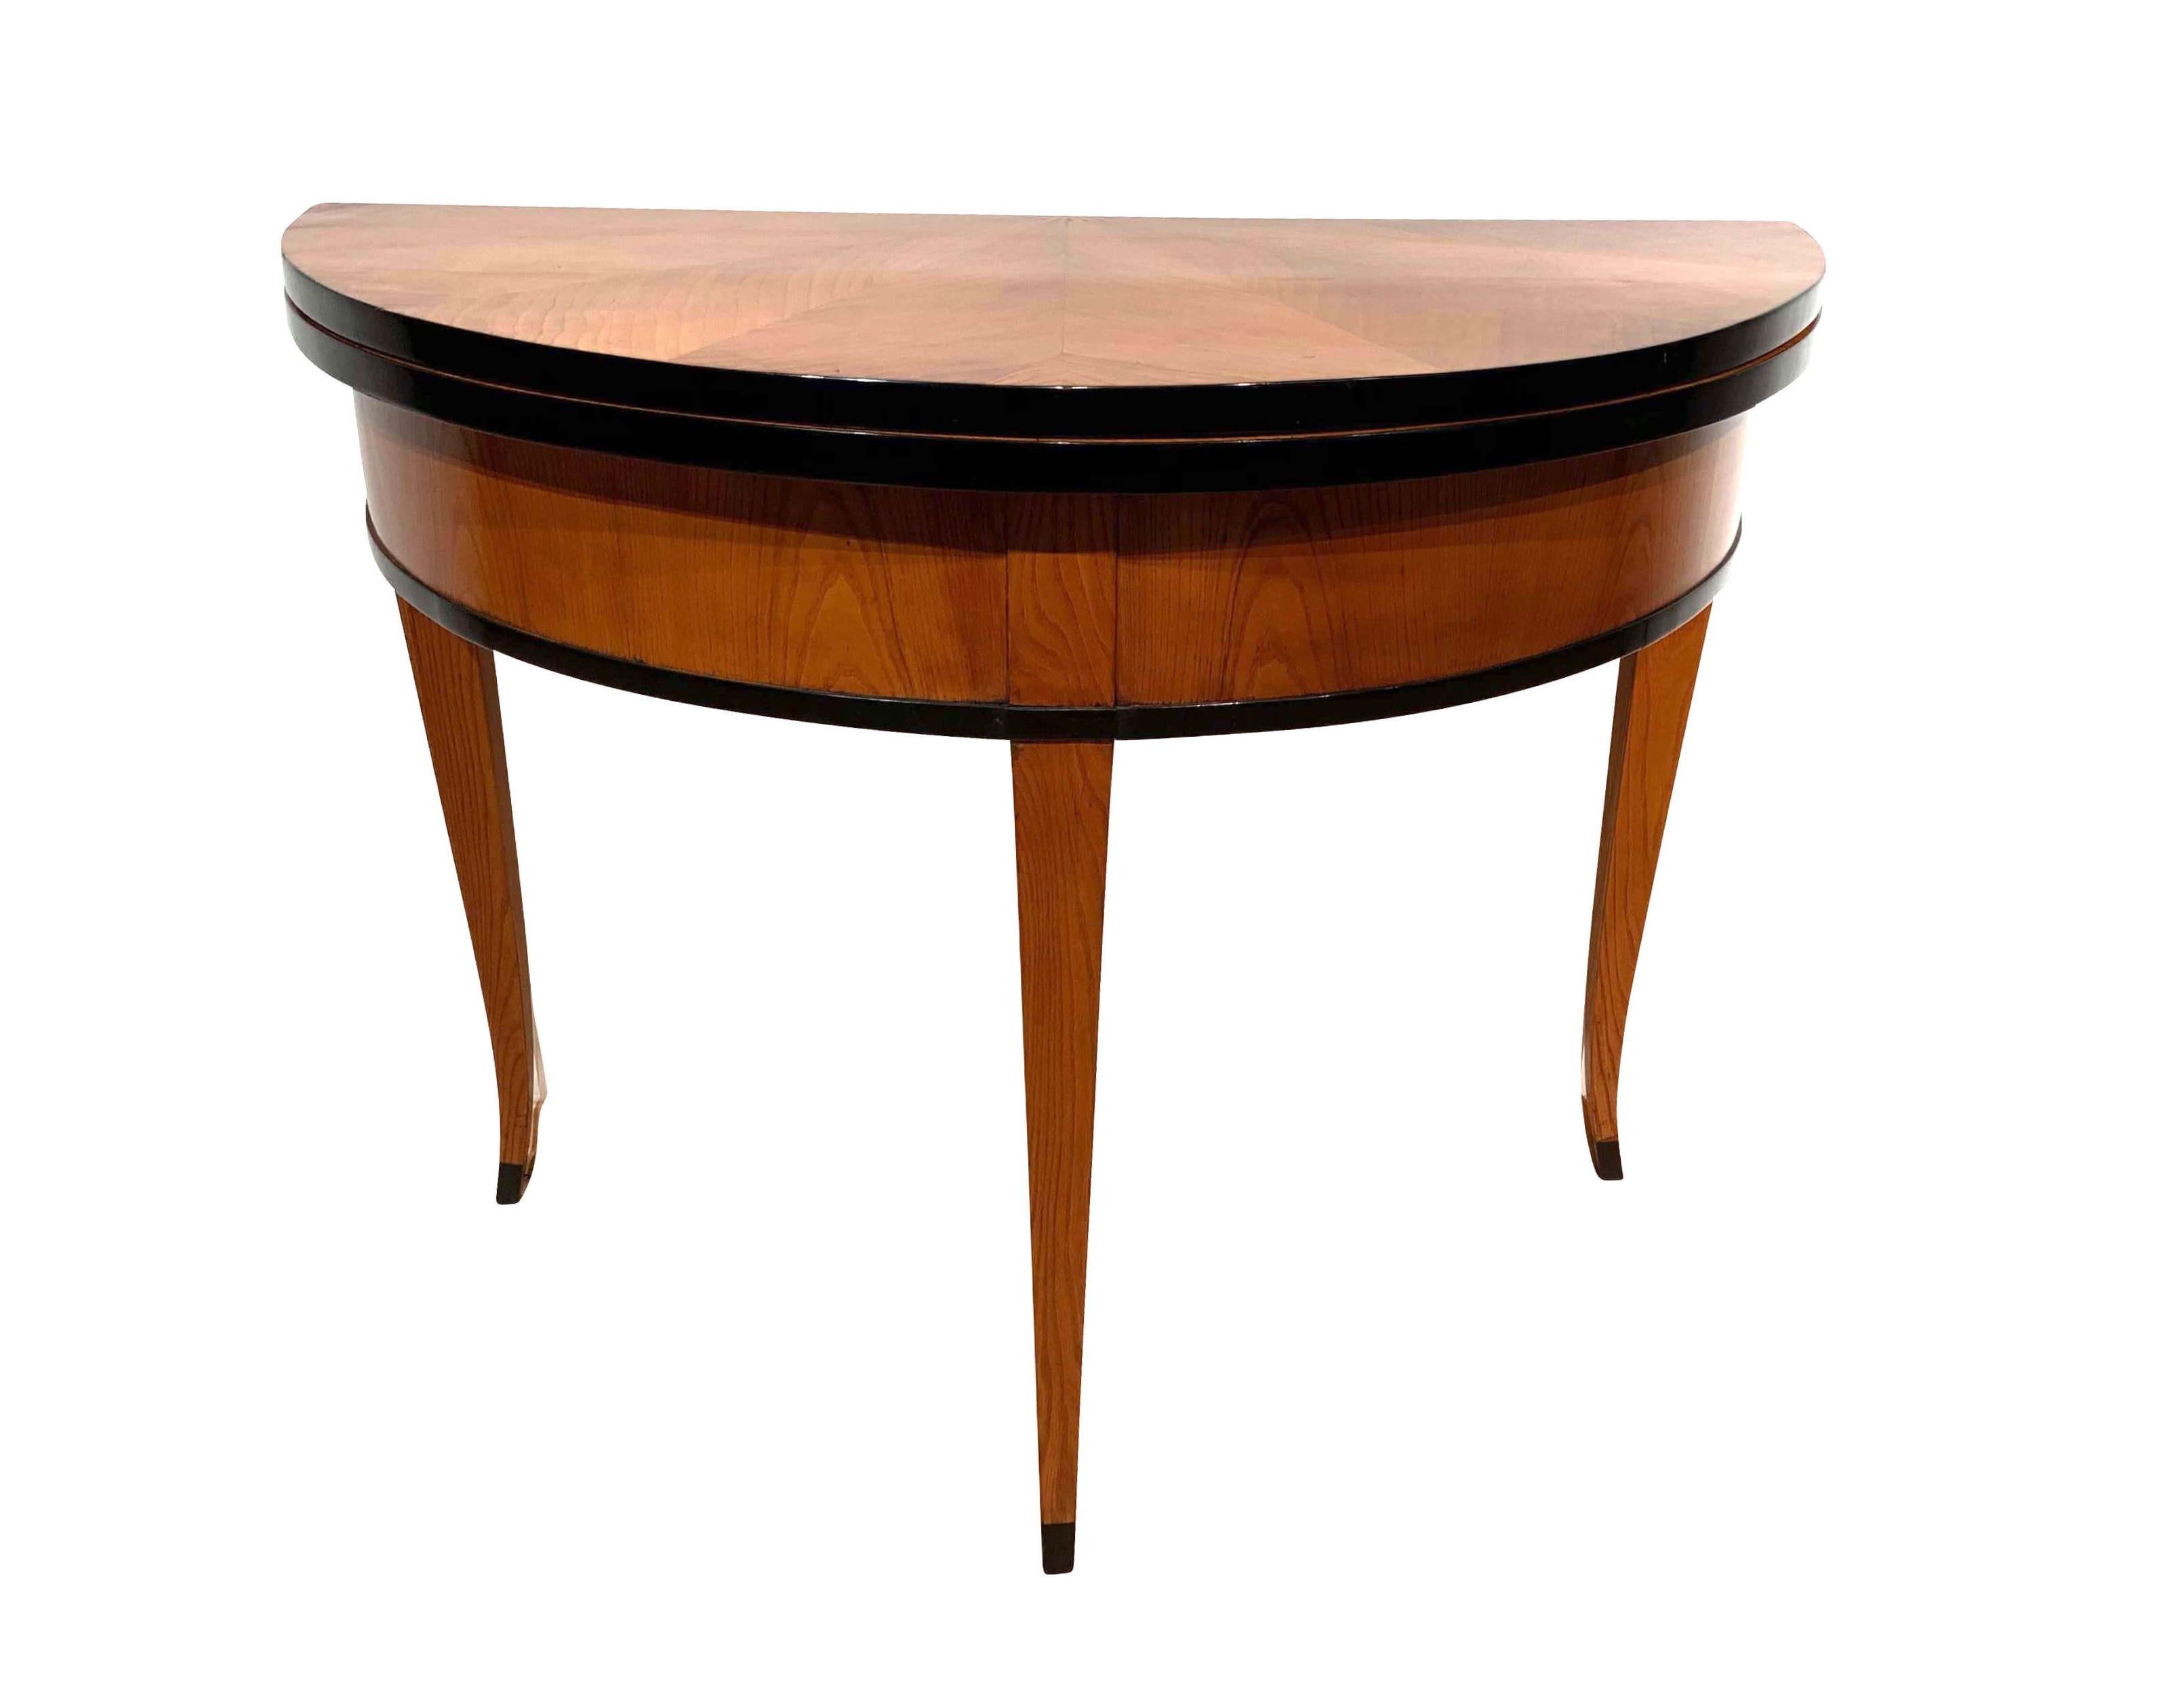 Beautiful demilune fold-out table with star shaped ash veneer.

Foldable on pull-out middle leg. Edge of the plate has been ebonized.
Curved square-pointed legs. Maple inlay on the plate (partly blackened)
Wonderful French polished high-gloss